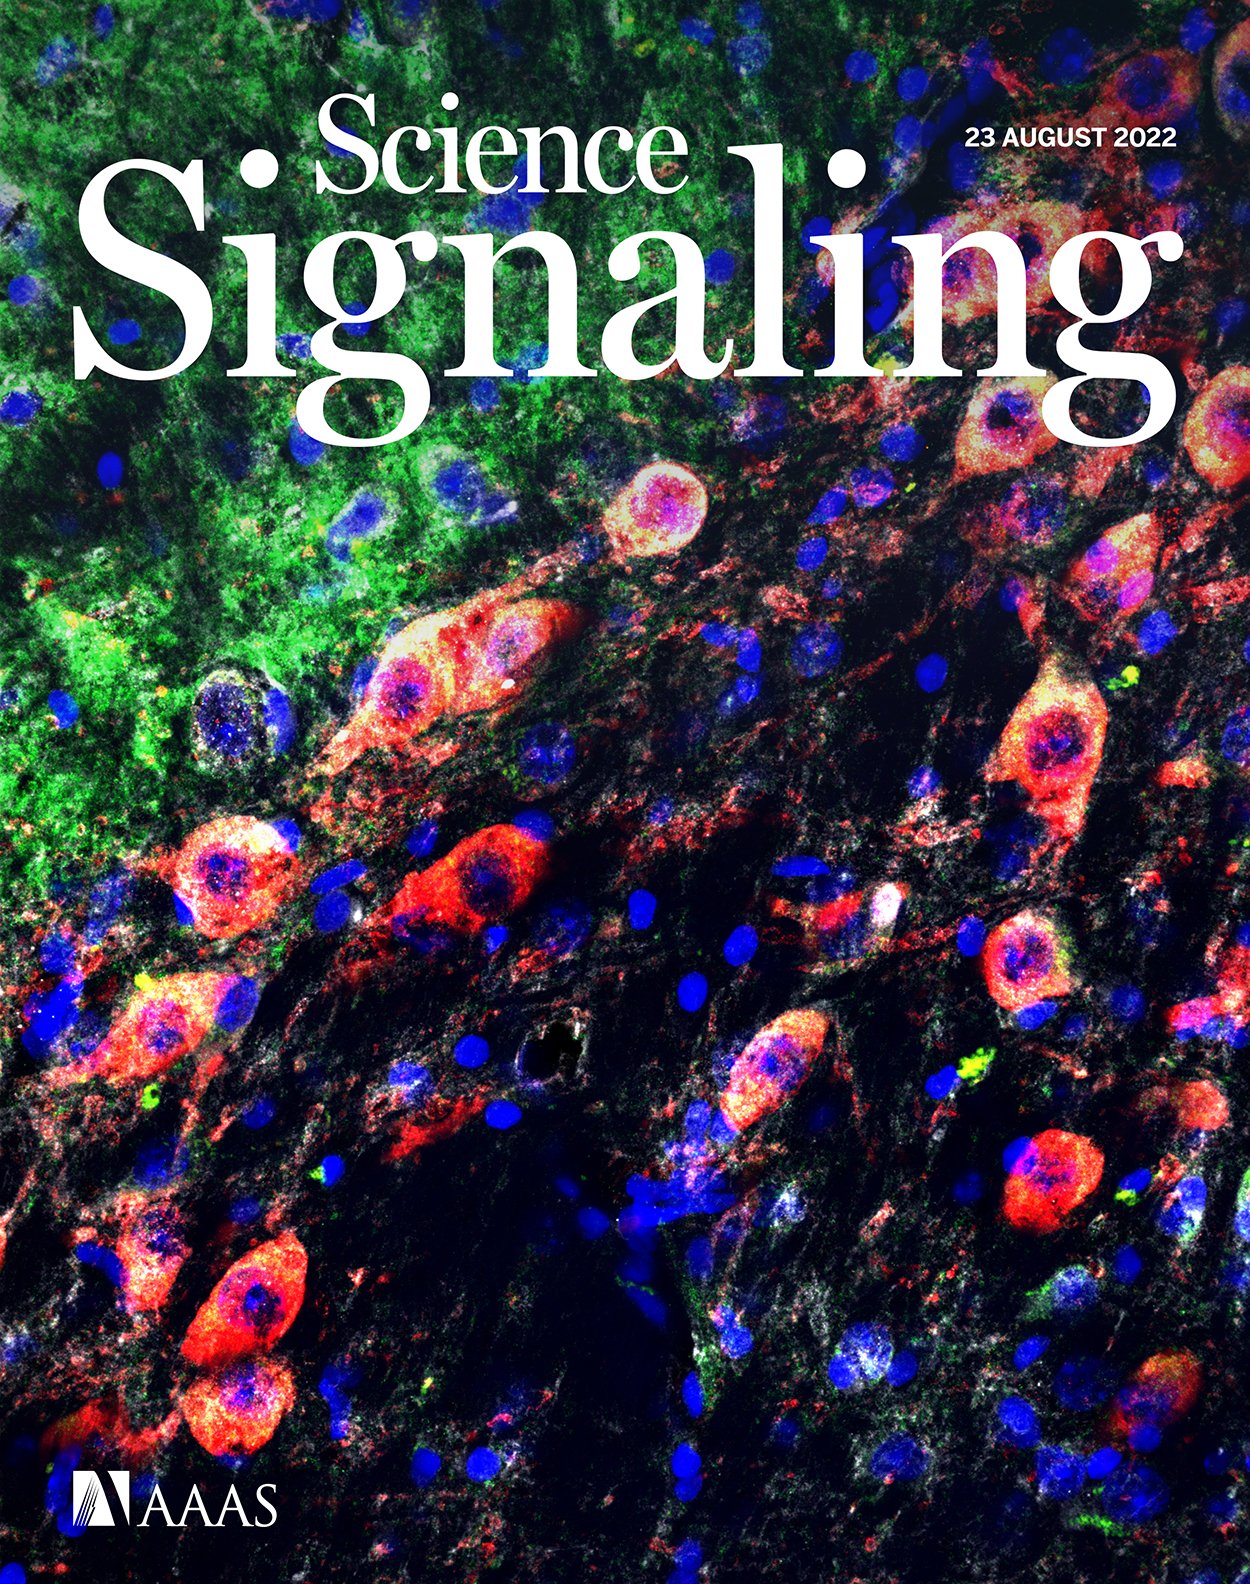 Go to Science Signaling information for authors